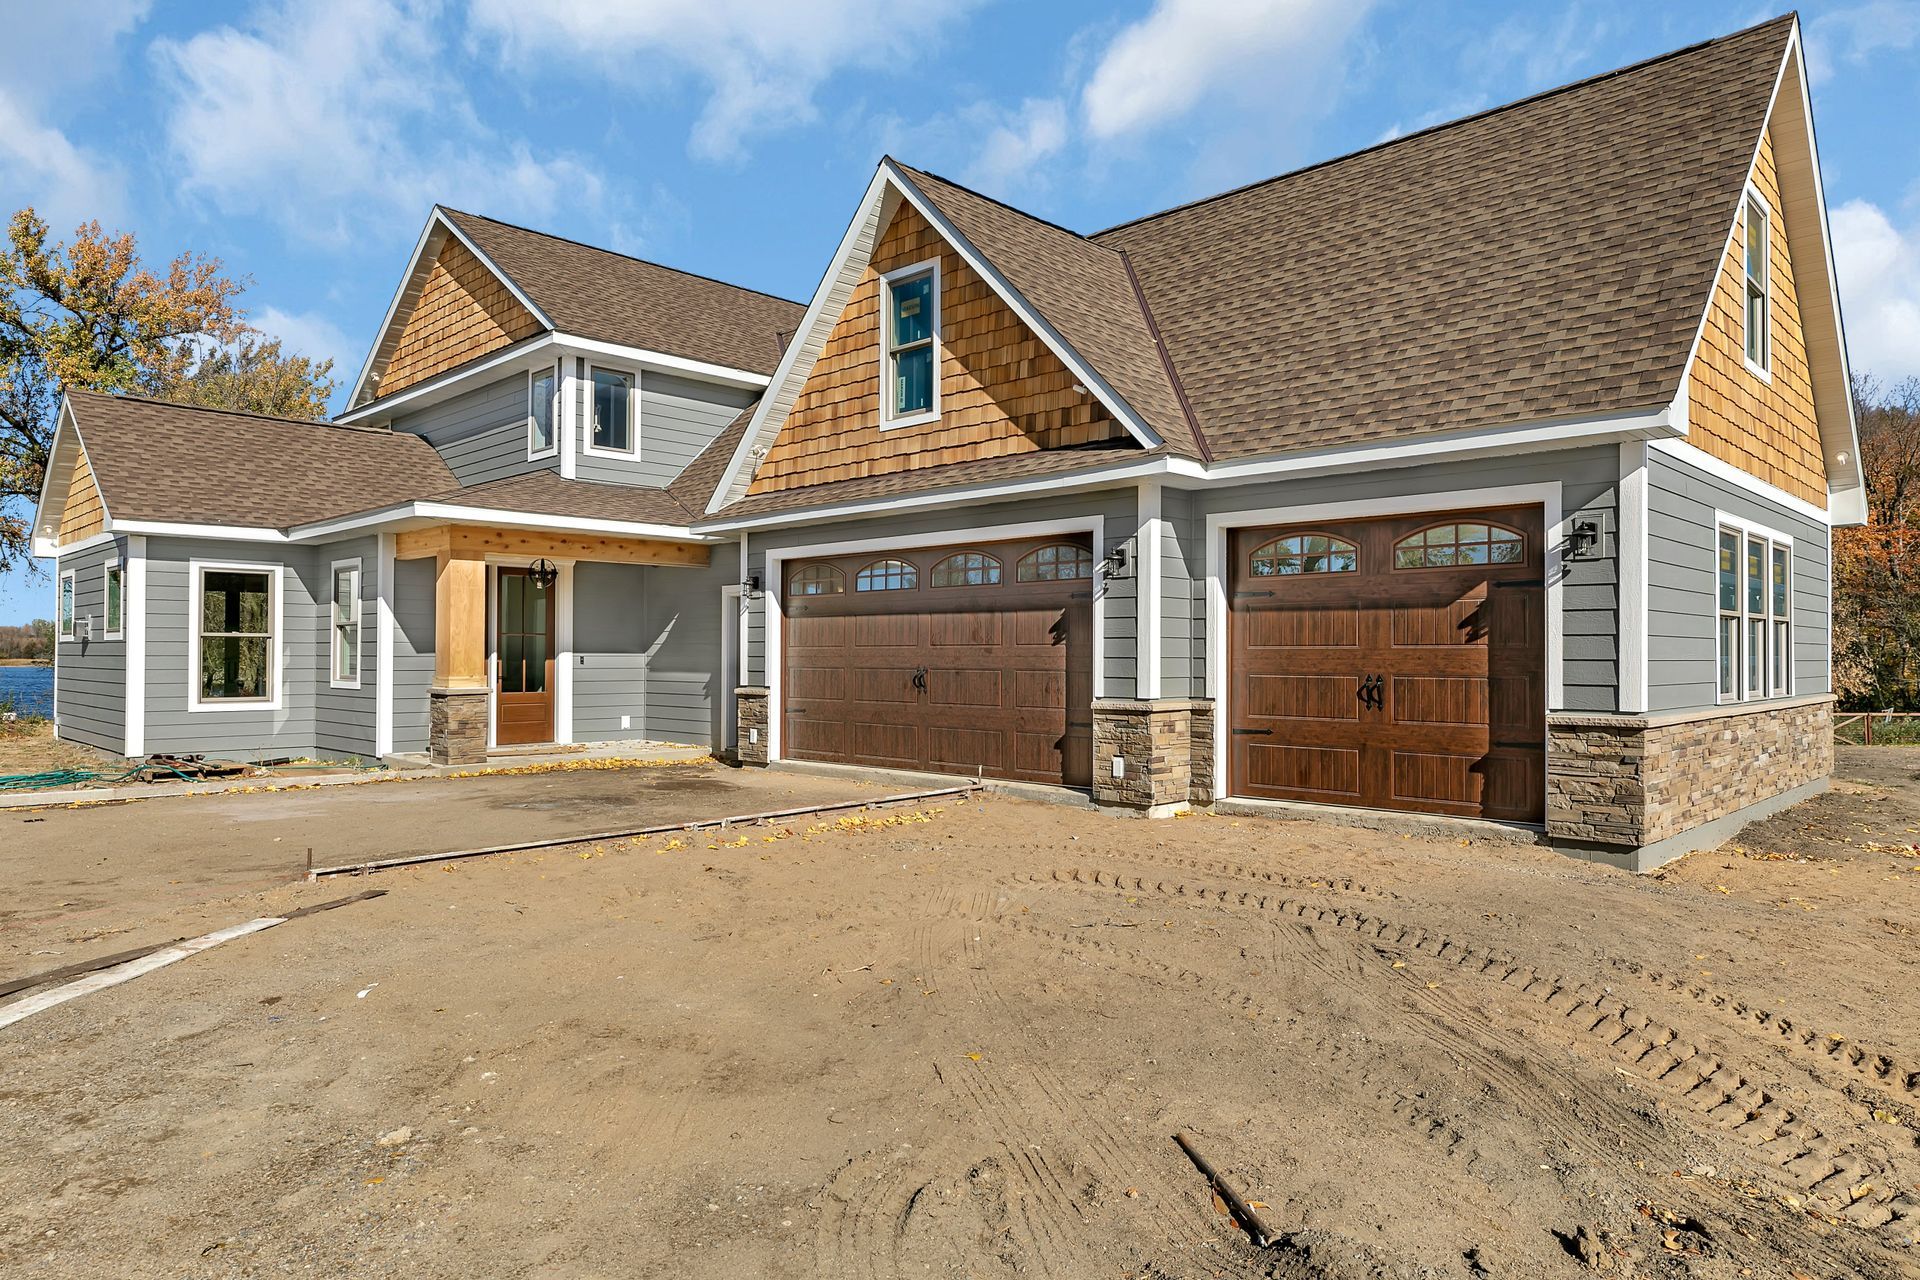 A large house with two garage doors is sitting on top of a dirt field.